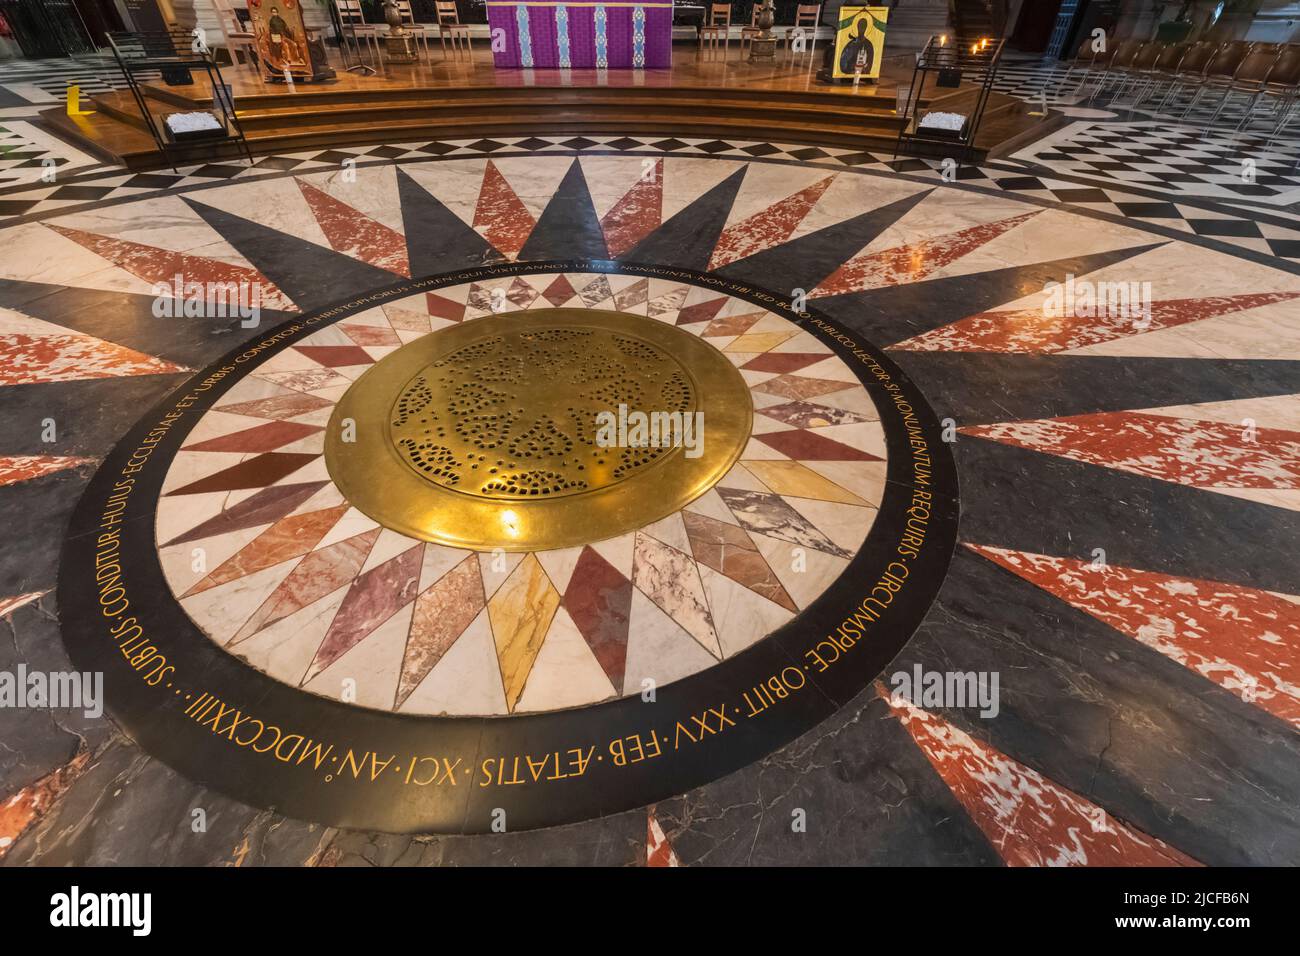 England, London, St. Paul's Cathedral, Bodenmuster unter dem Dome und dem Dome Altar Stockfoto